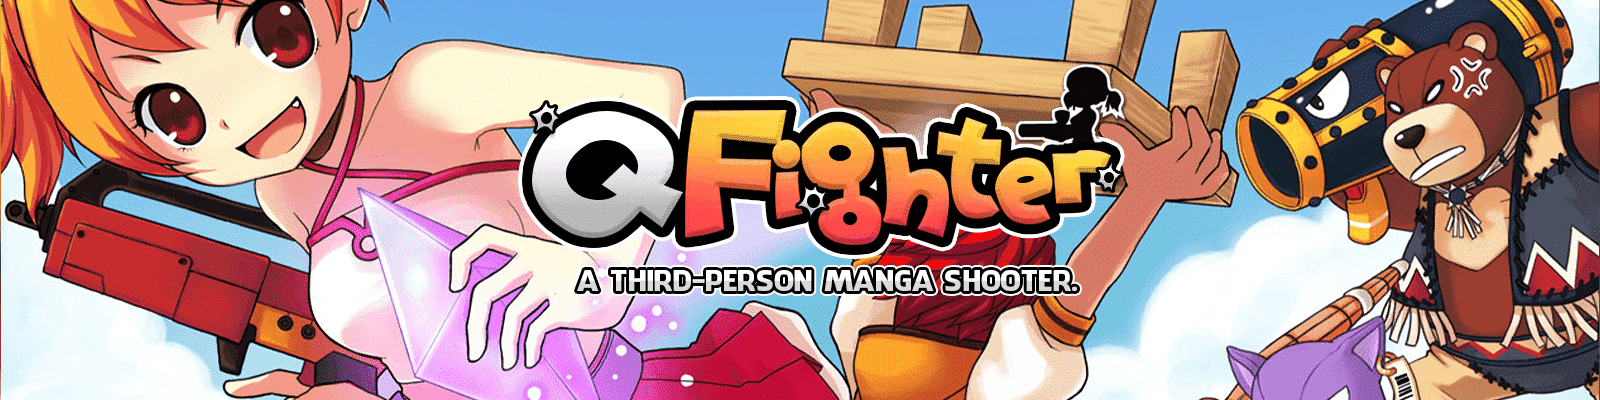 qfighter_homepage_banner.png